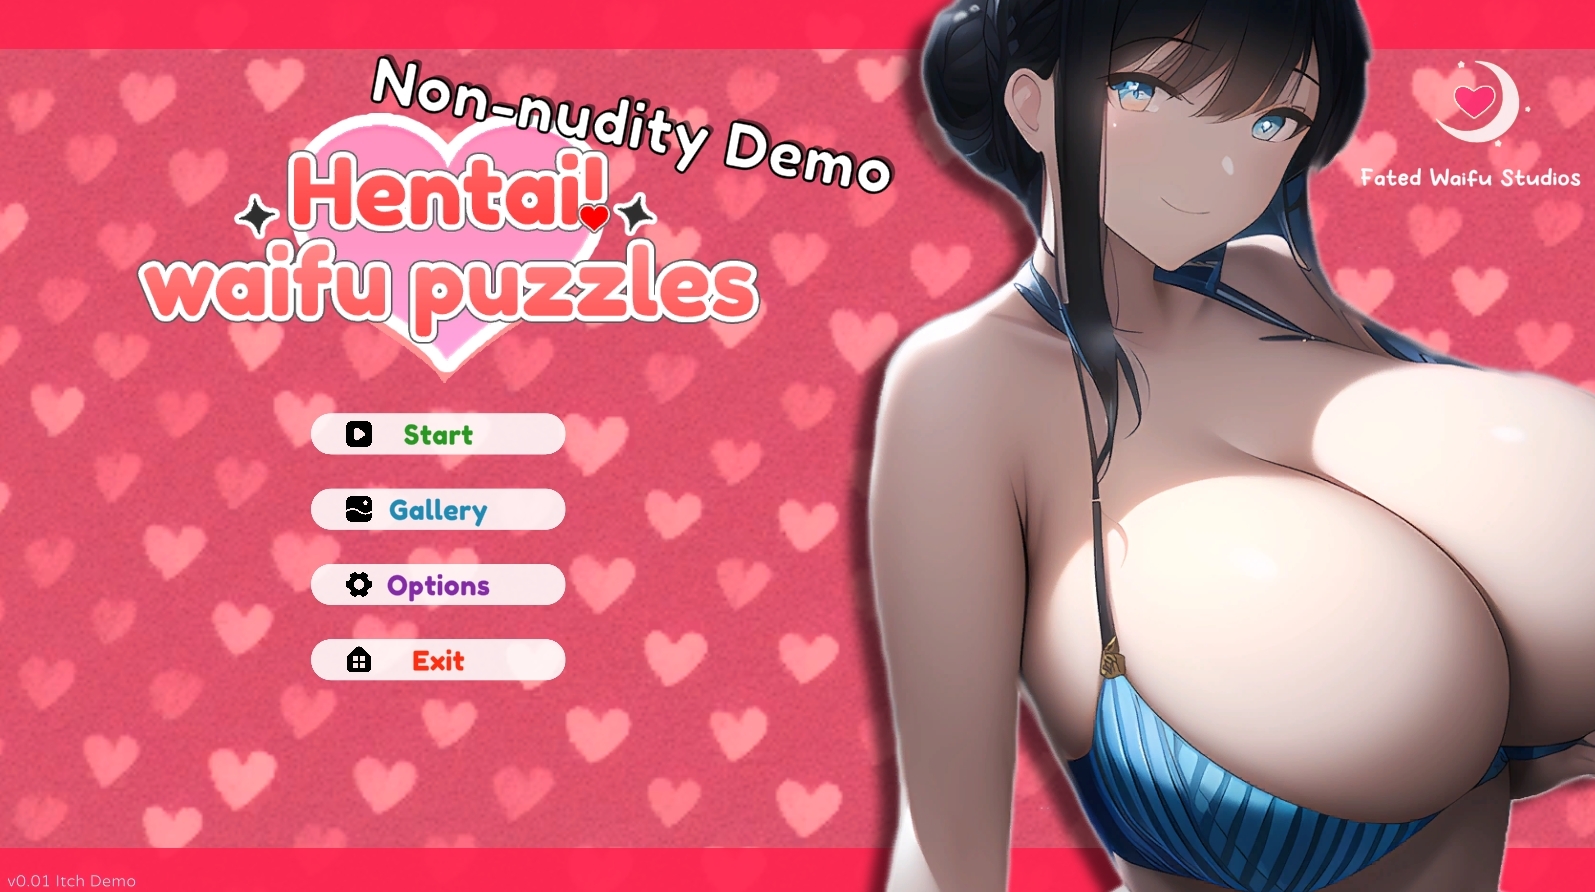 Hentai Puzzle - Hentai! Waifu Puzzles - free porn game download, adult nsfw games for free  - xplay.me